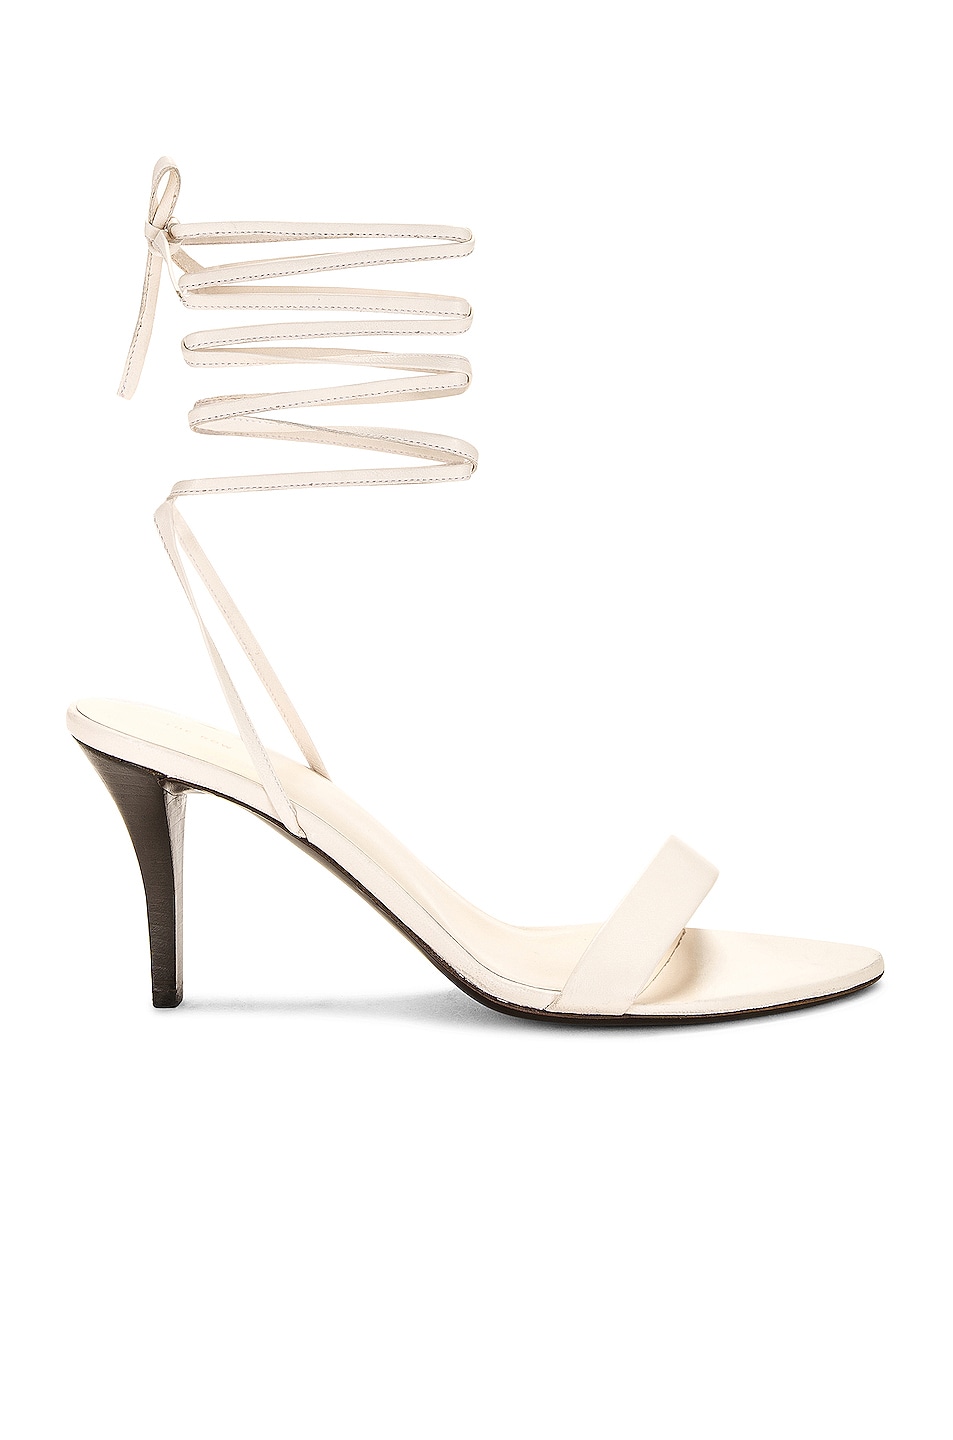 Image 1 of The Row Maud Sandal in Milk